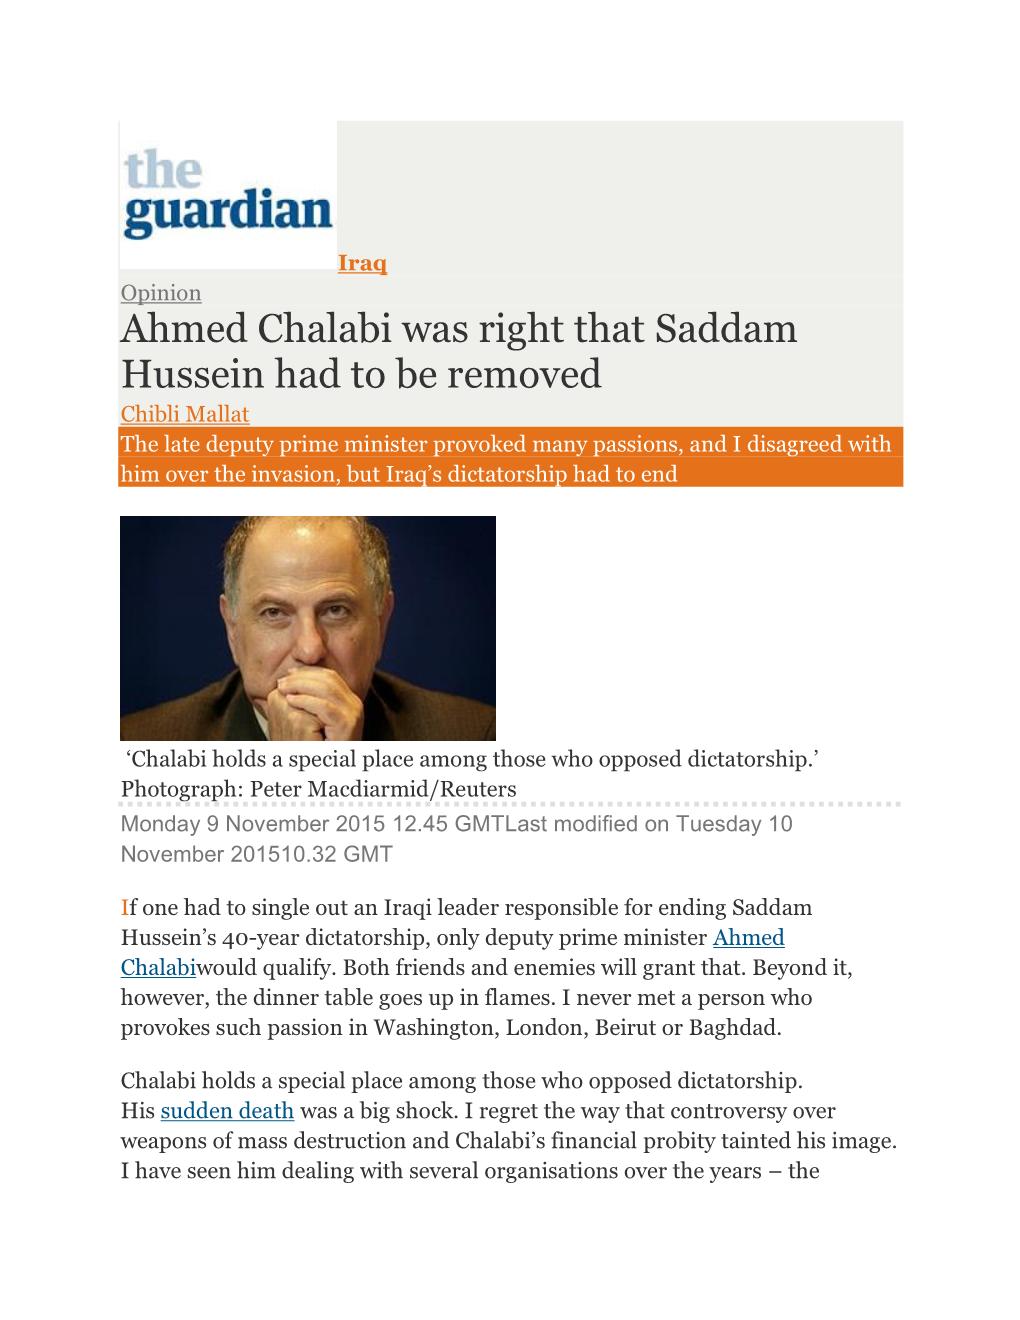 Ahmed Chalabi Was Right That Saddam Hussein Had to Be Removed